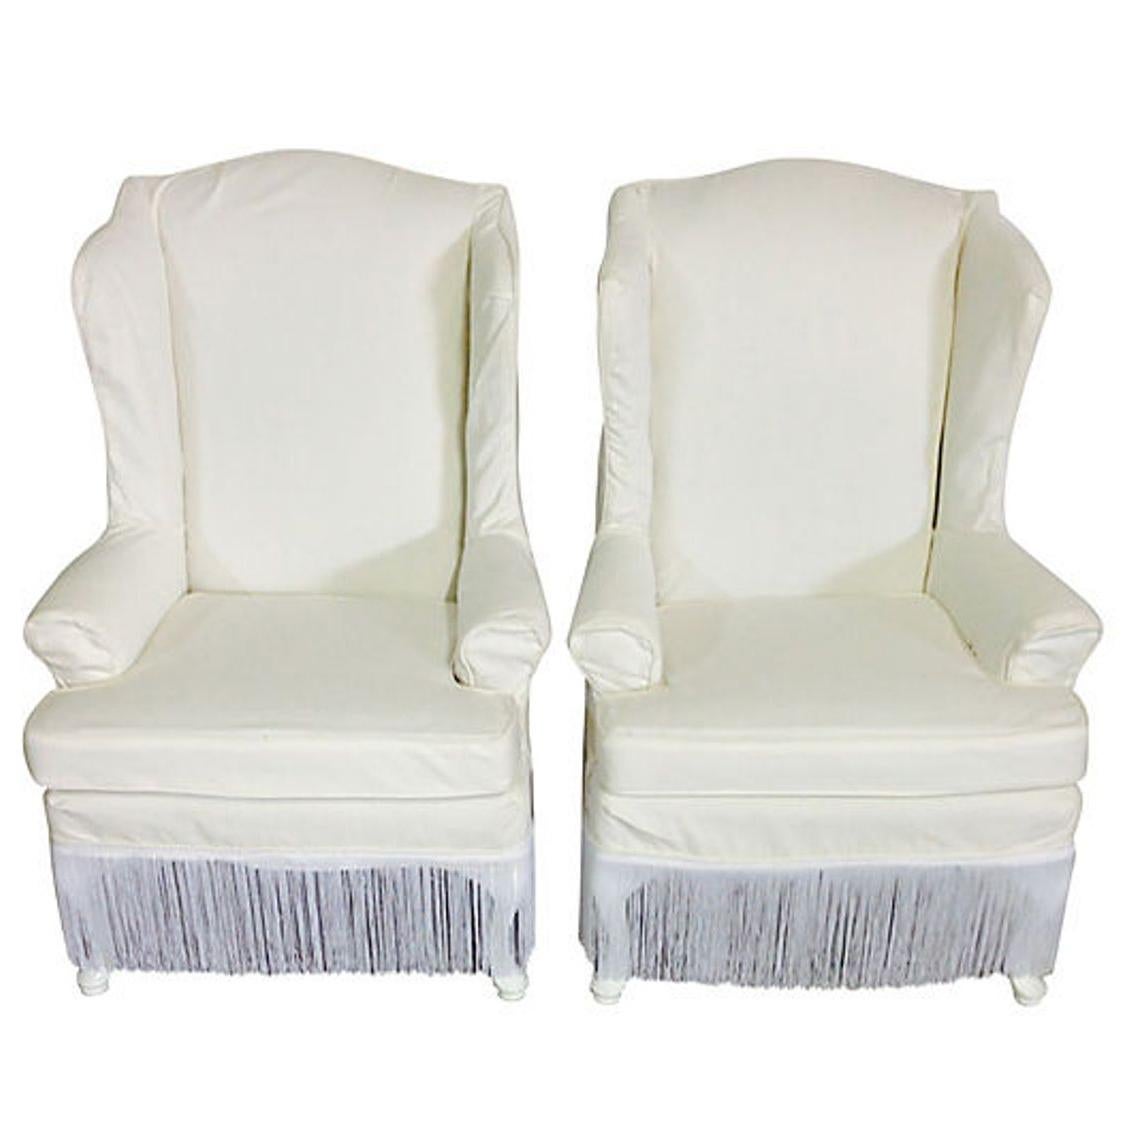 20th Century Pair Of American Queen Anne Style Wing Back Chairs For Sale